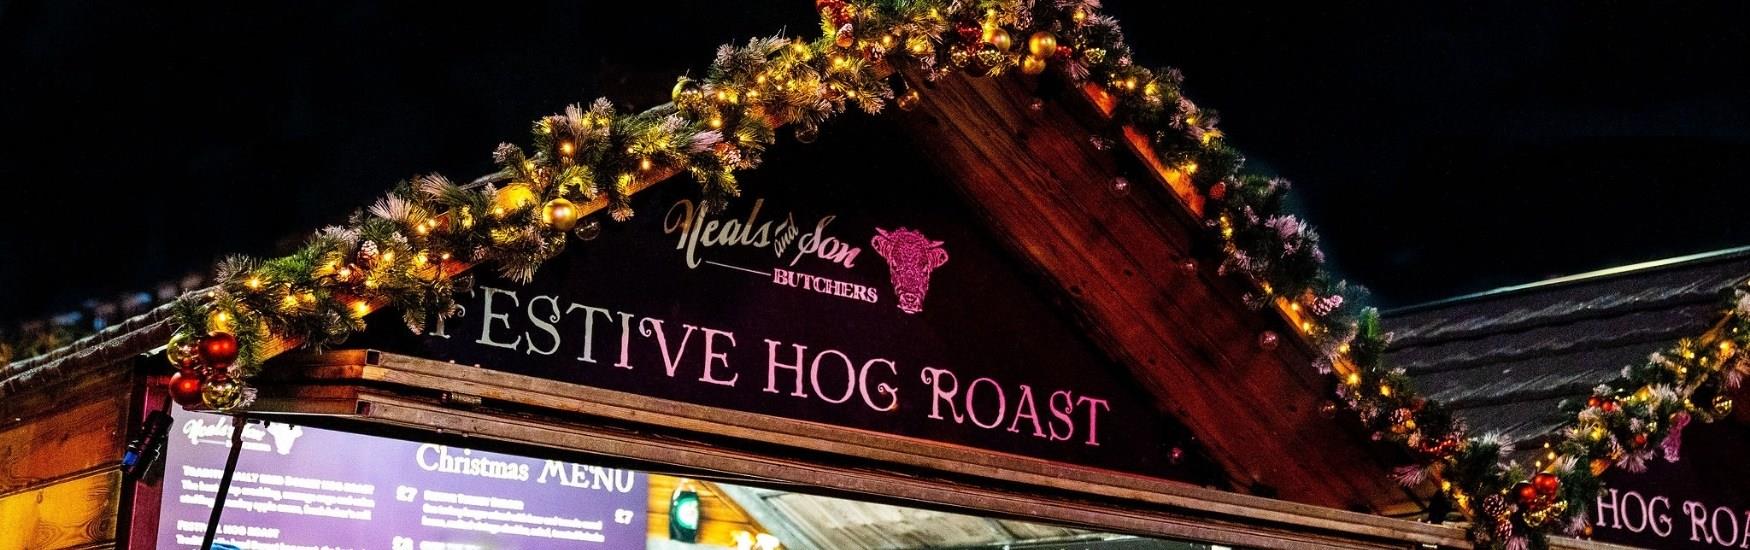 Festive Hog Roast market stall found in Bournemouths town centre this Christmas